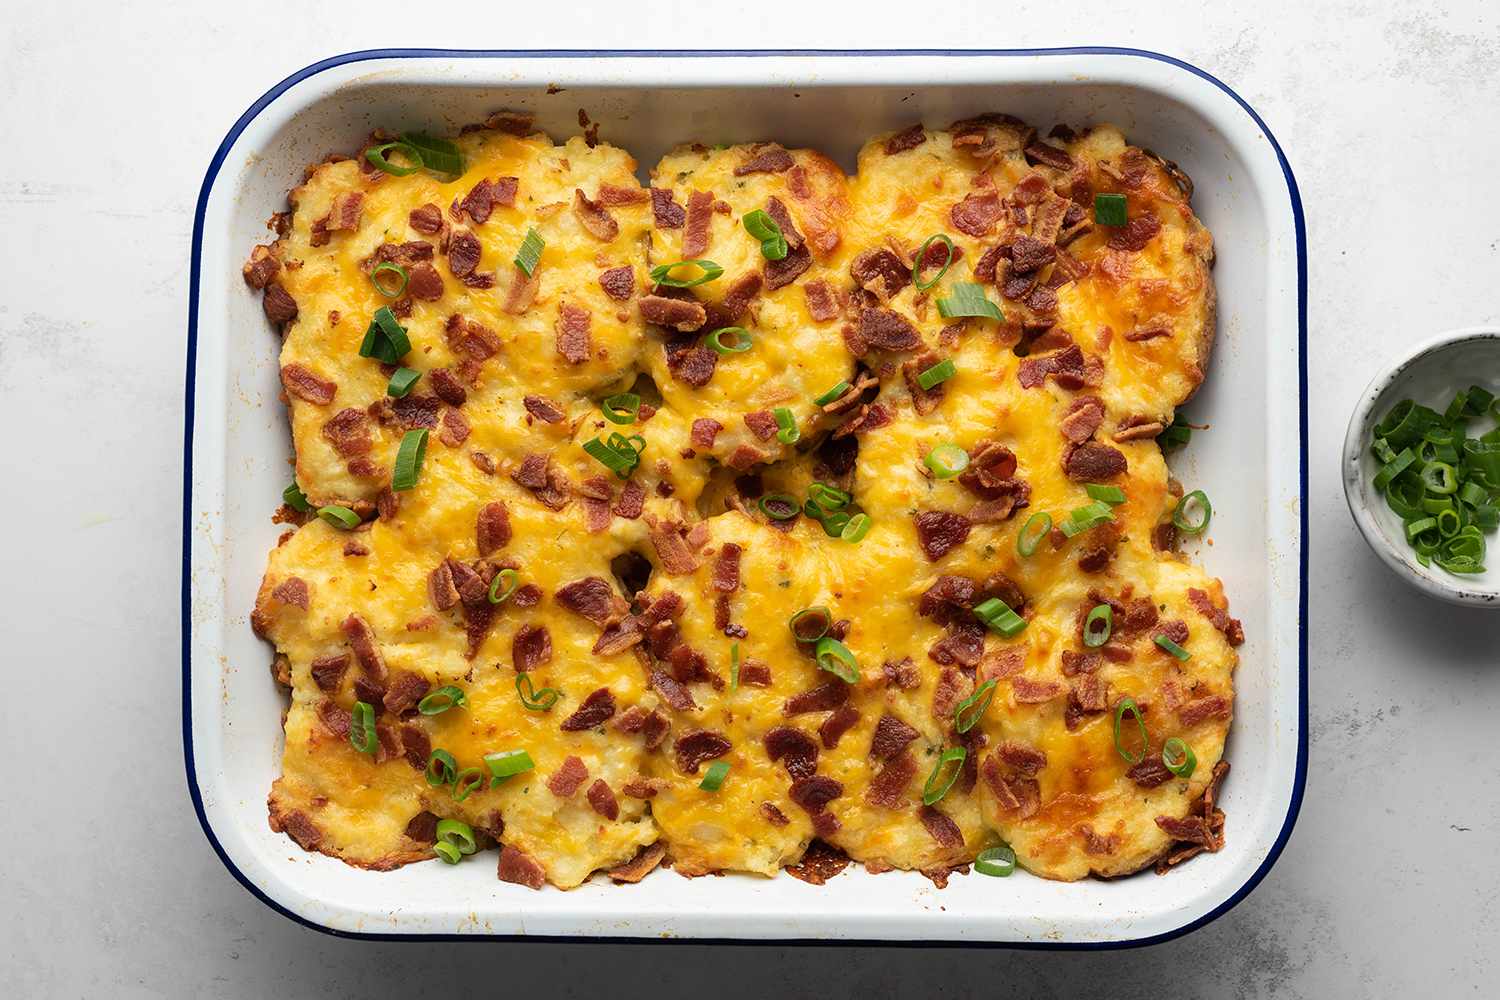 Twice Baked Potato Casserole in a baking dish, garnished with green onions